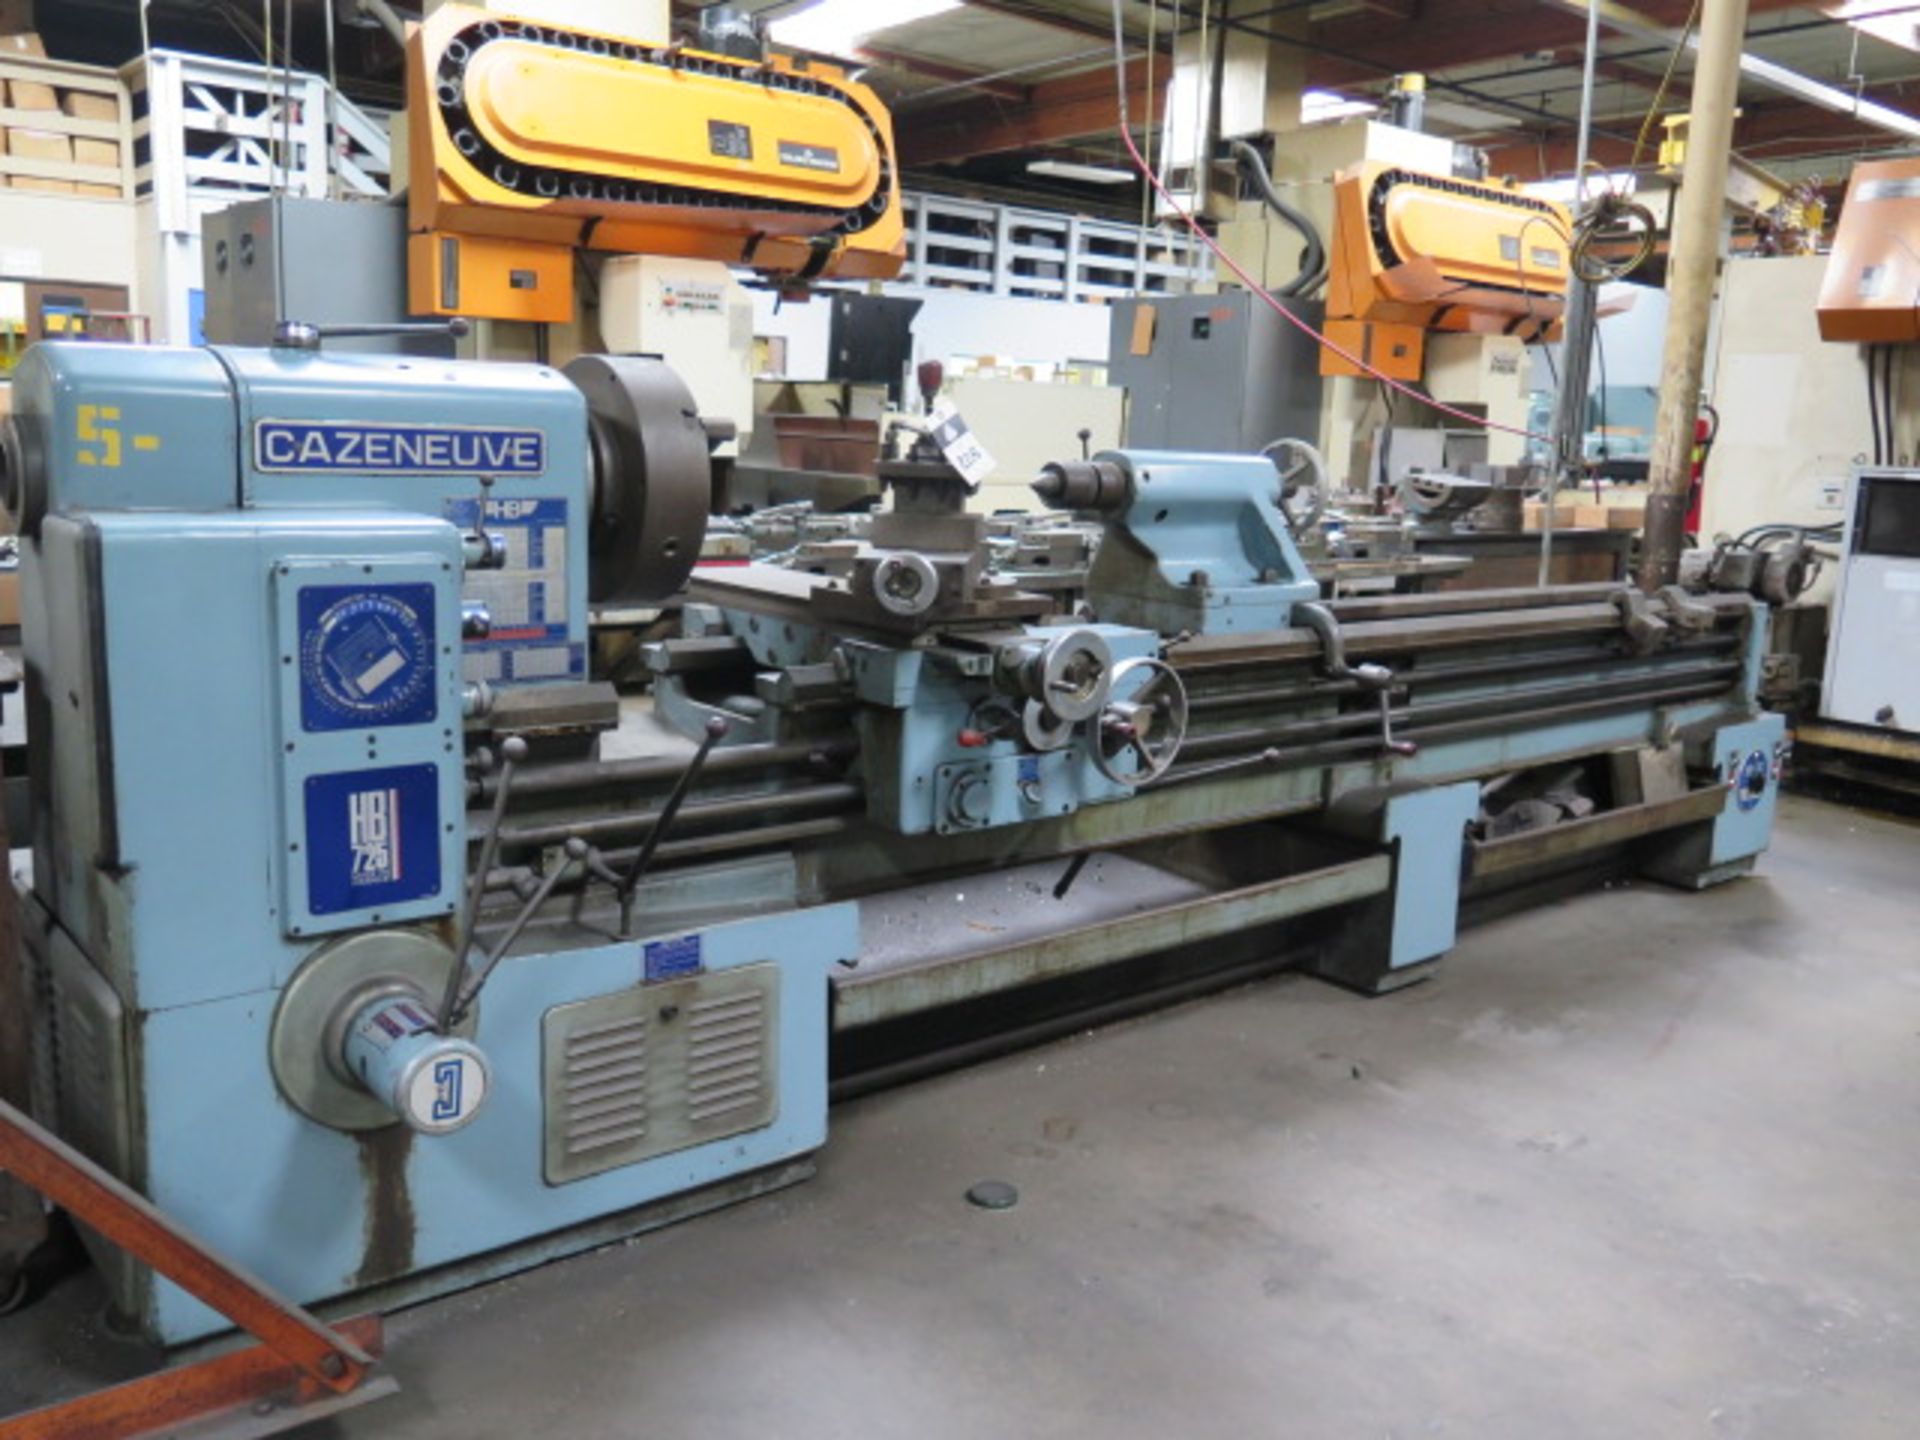 Cazeneuve HB725 26 ½” x 122” Geared Head Gap Bed Lathe w/ 14-1600 RPM, Inch/mm Threading, SOLD AS IS - Image 2 of 11